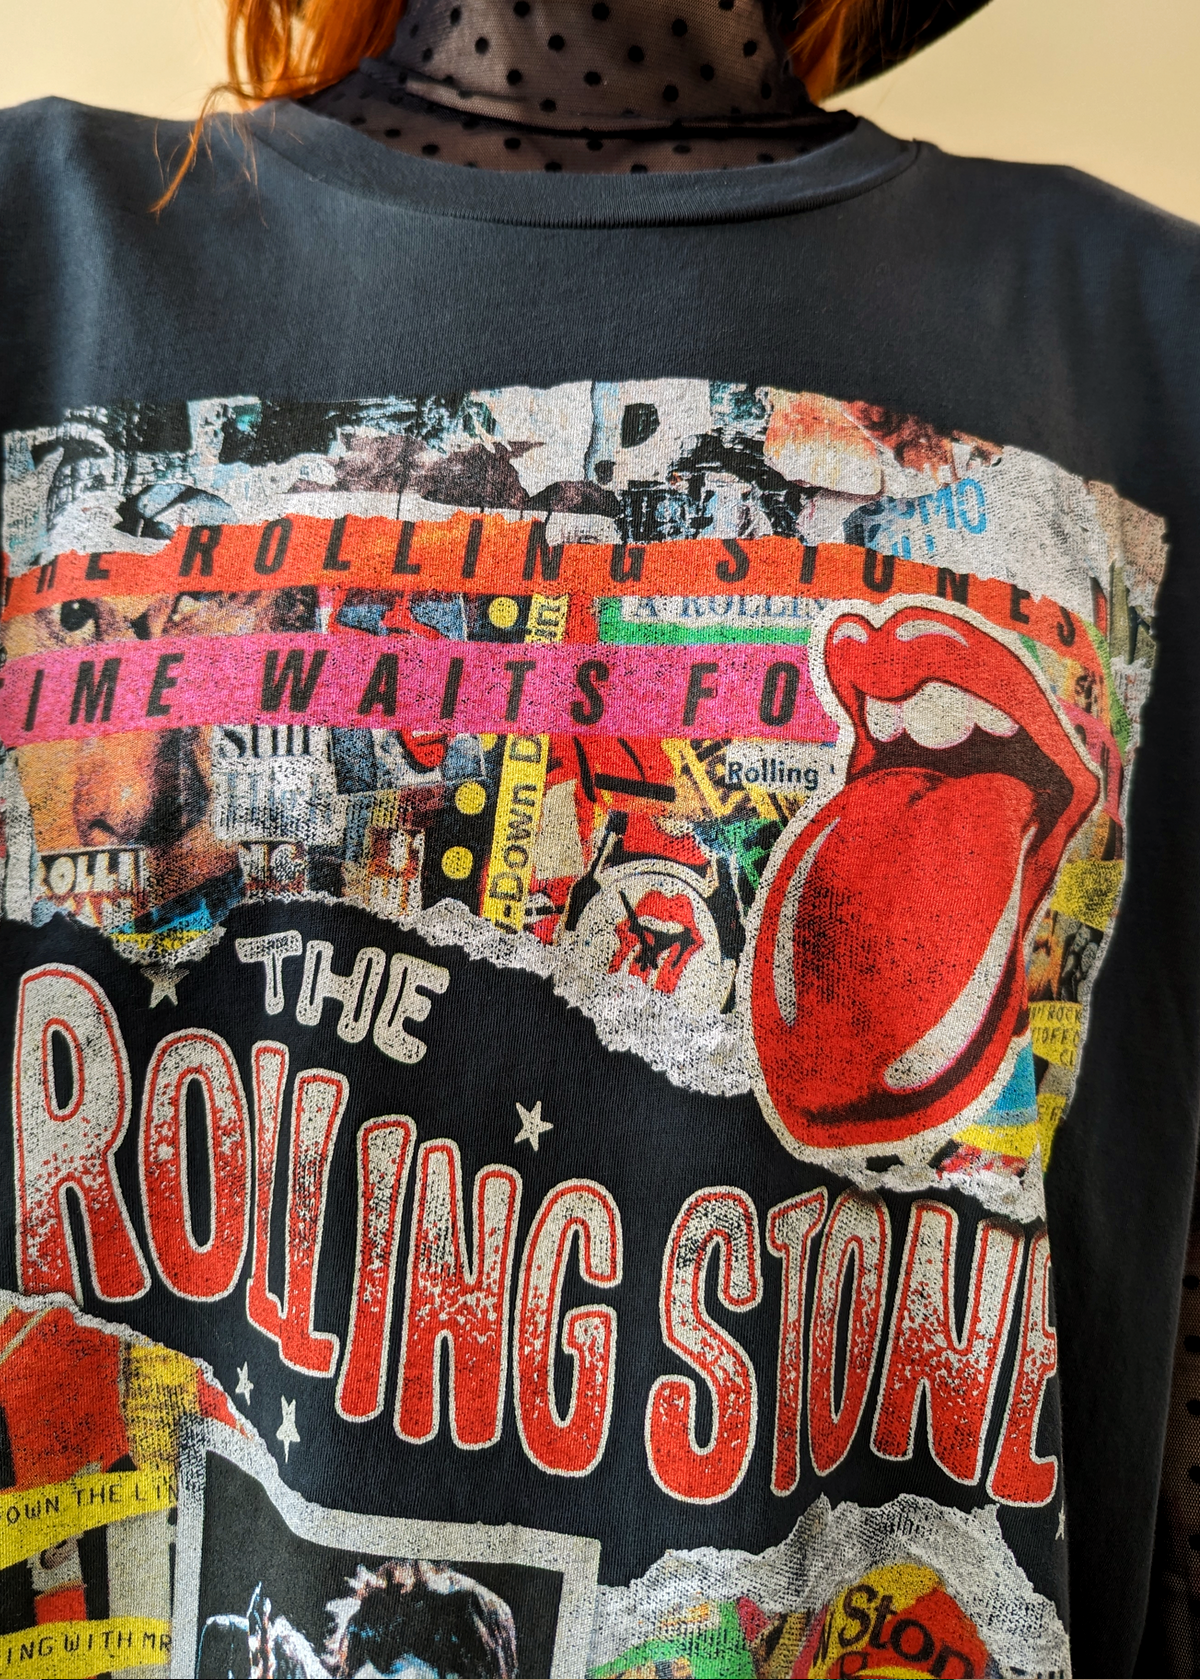 Daydreamer LA Rolling Stones Time Waits for No One Tongue Tickets Photograph Oversized Tee. Officially Licensed and made in California